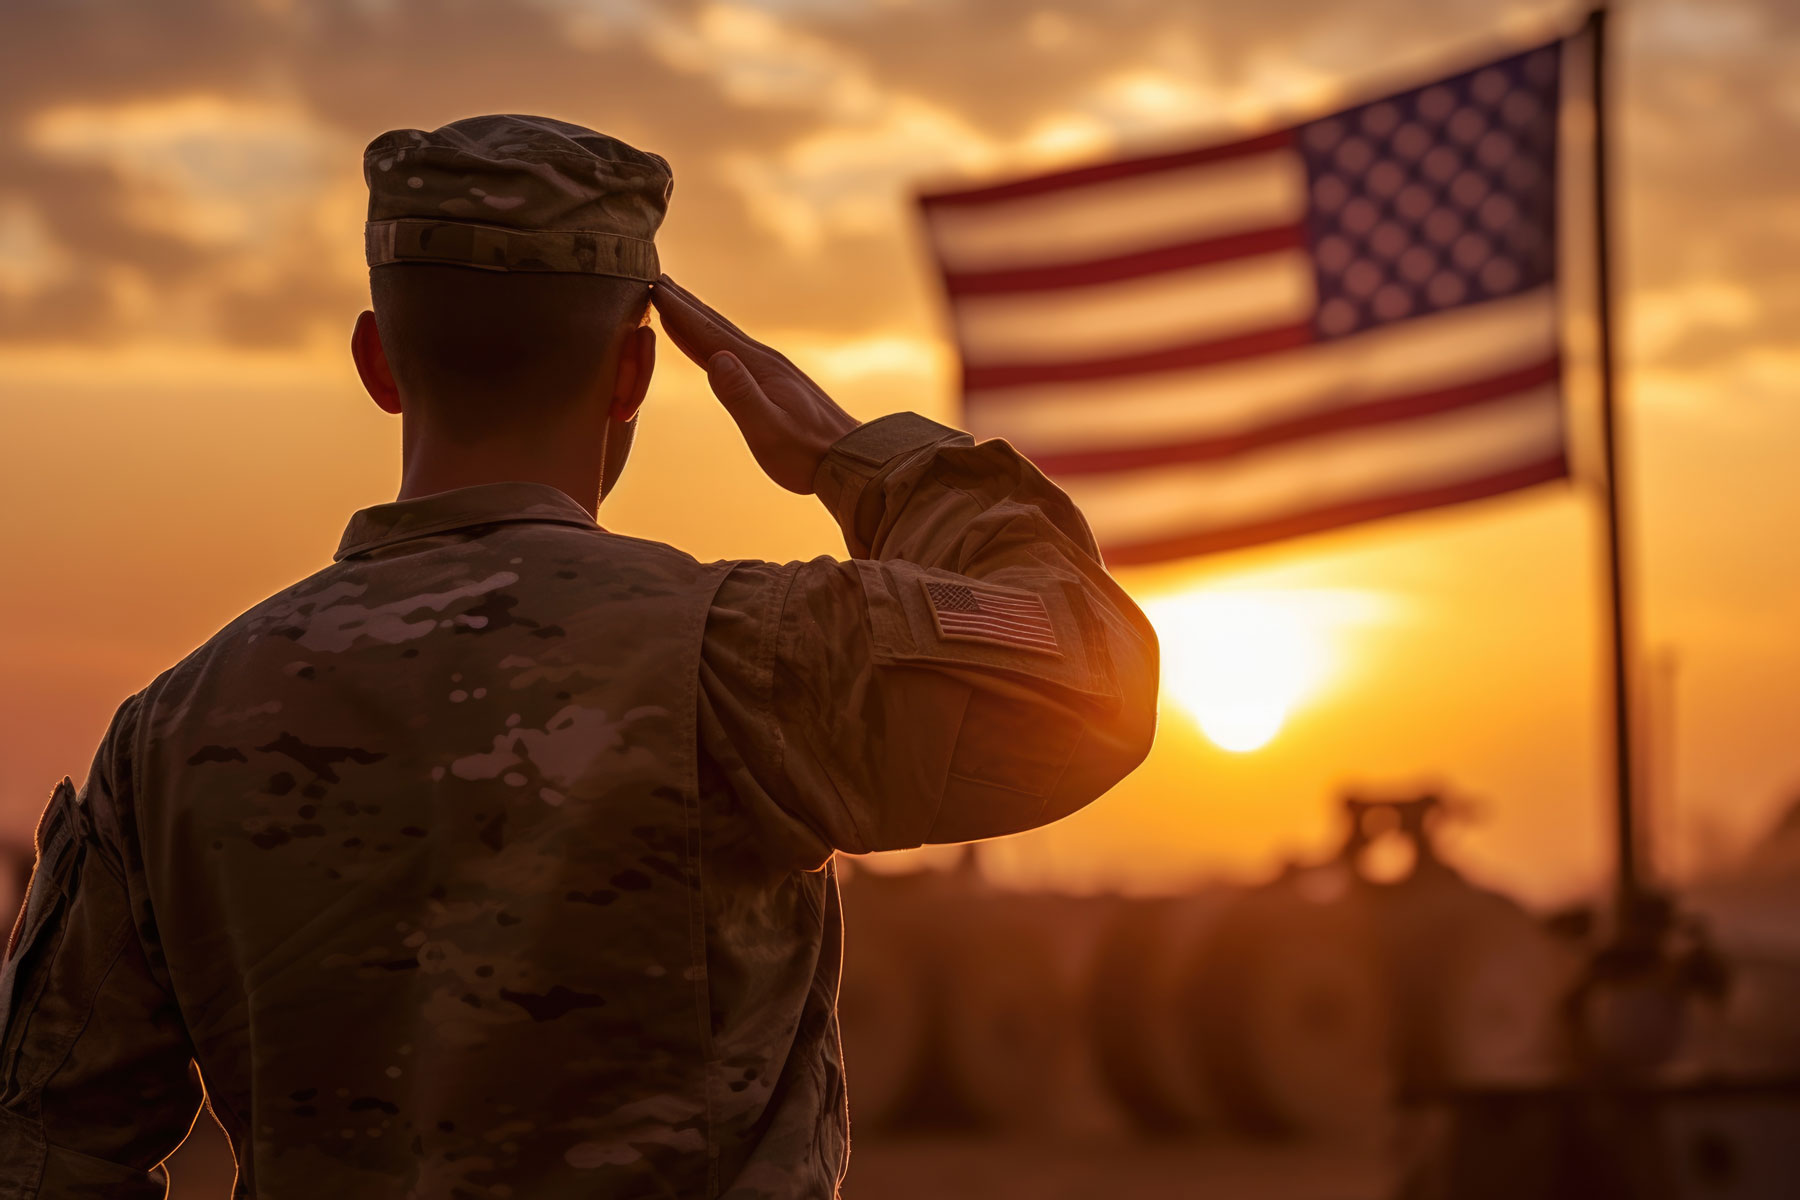 US Army soldier saluting the American flag while the sun sets in the background.